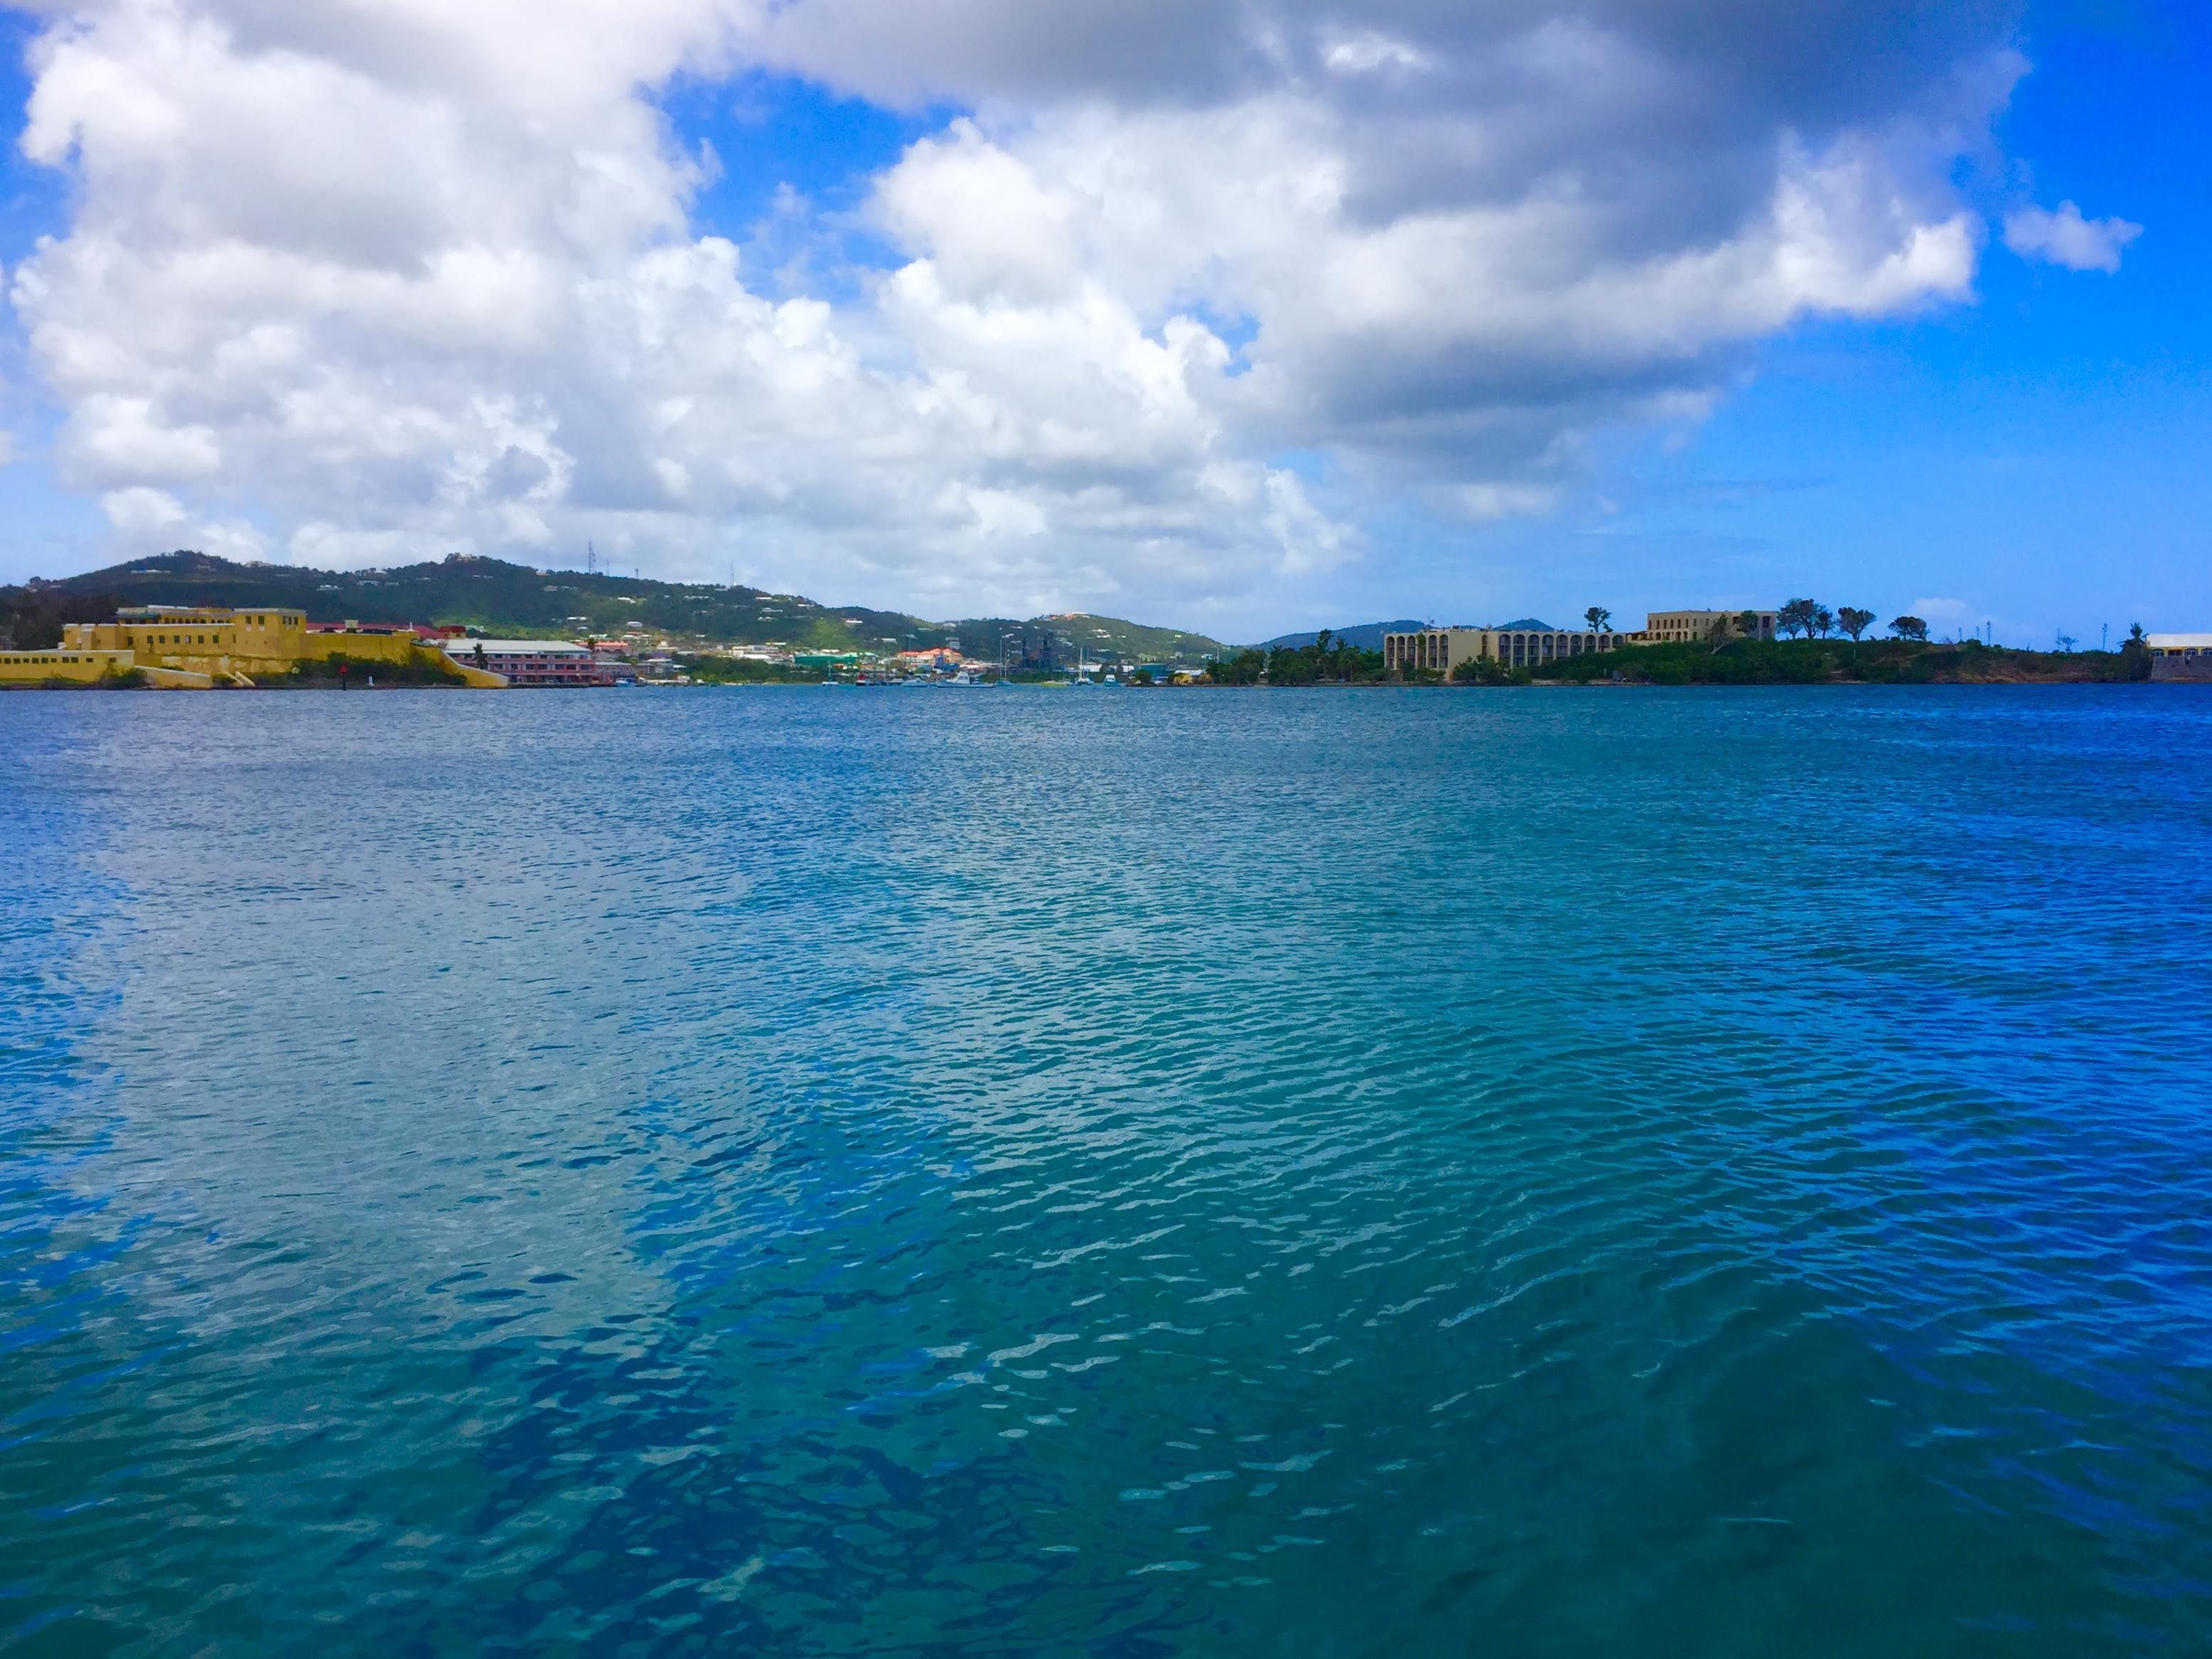 Aqua blue harbor with Christiansted, St. Croix in the background